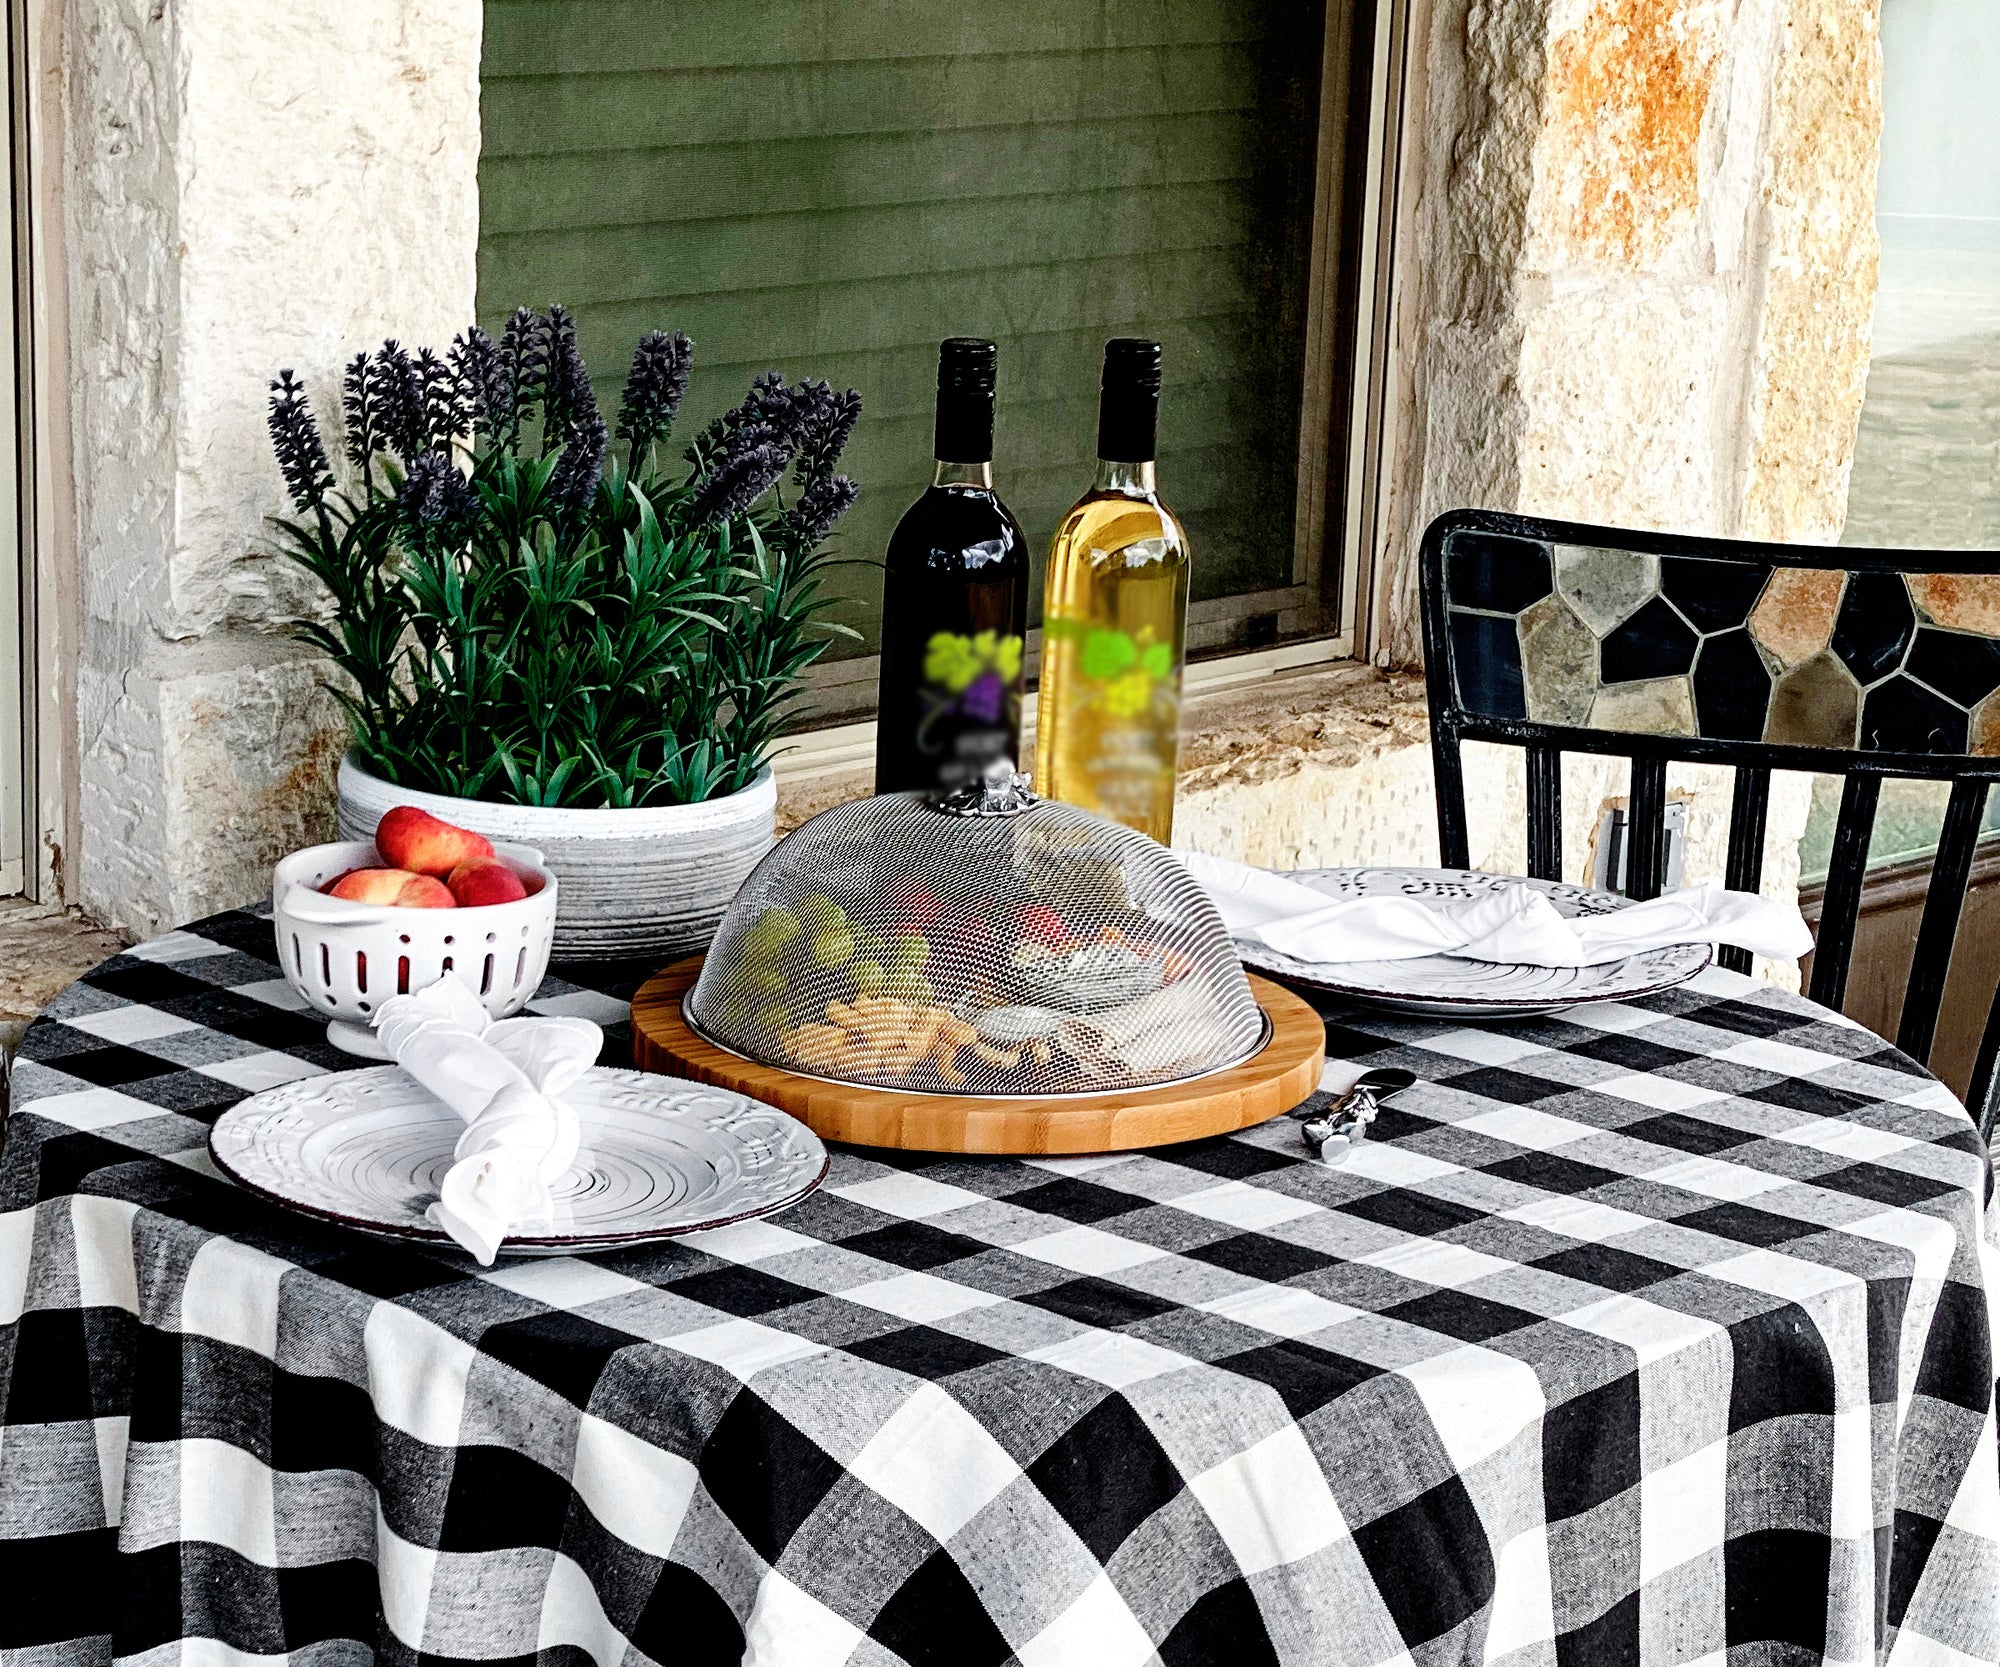 How to Get Red Wine Stains Out of Tablecloth in No Time